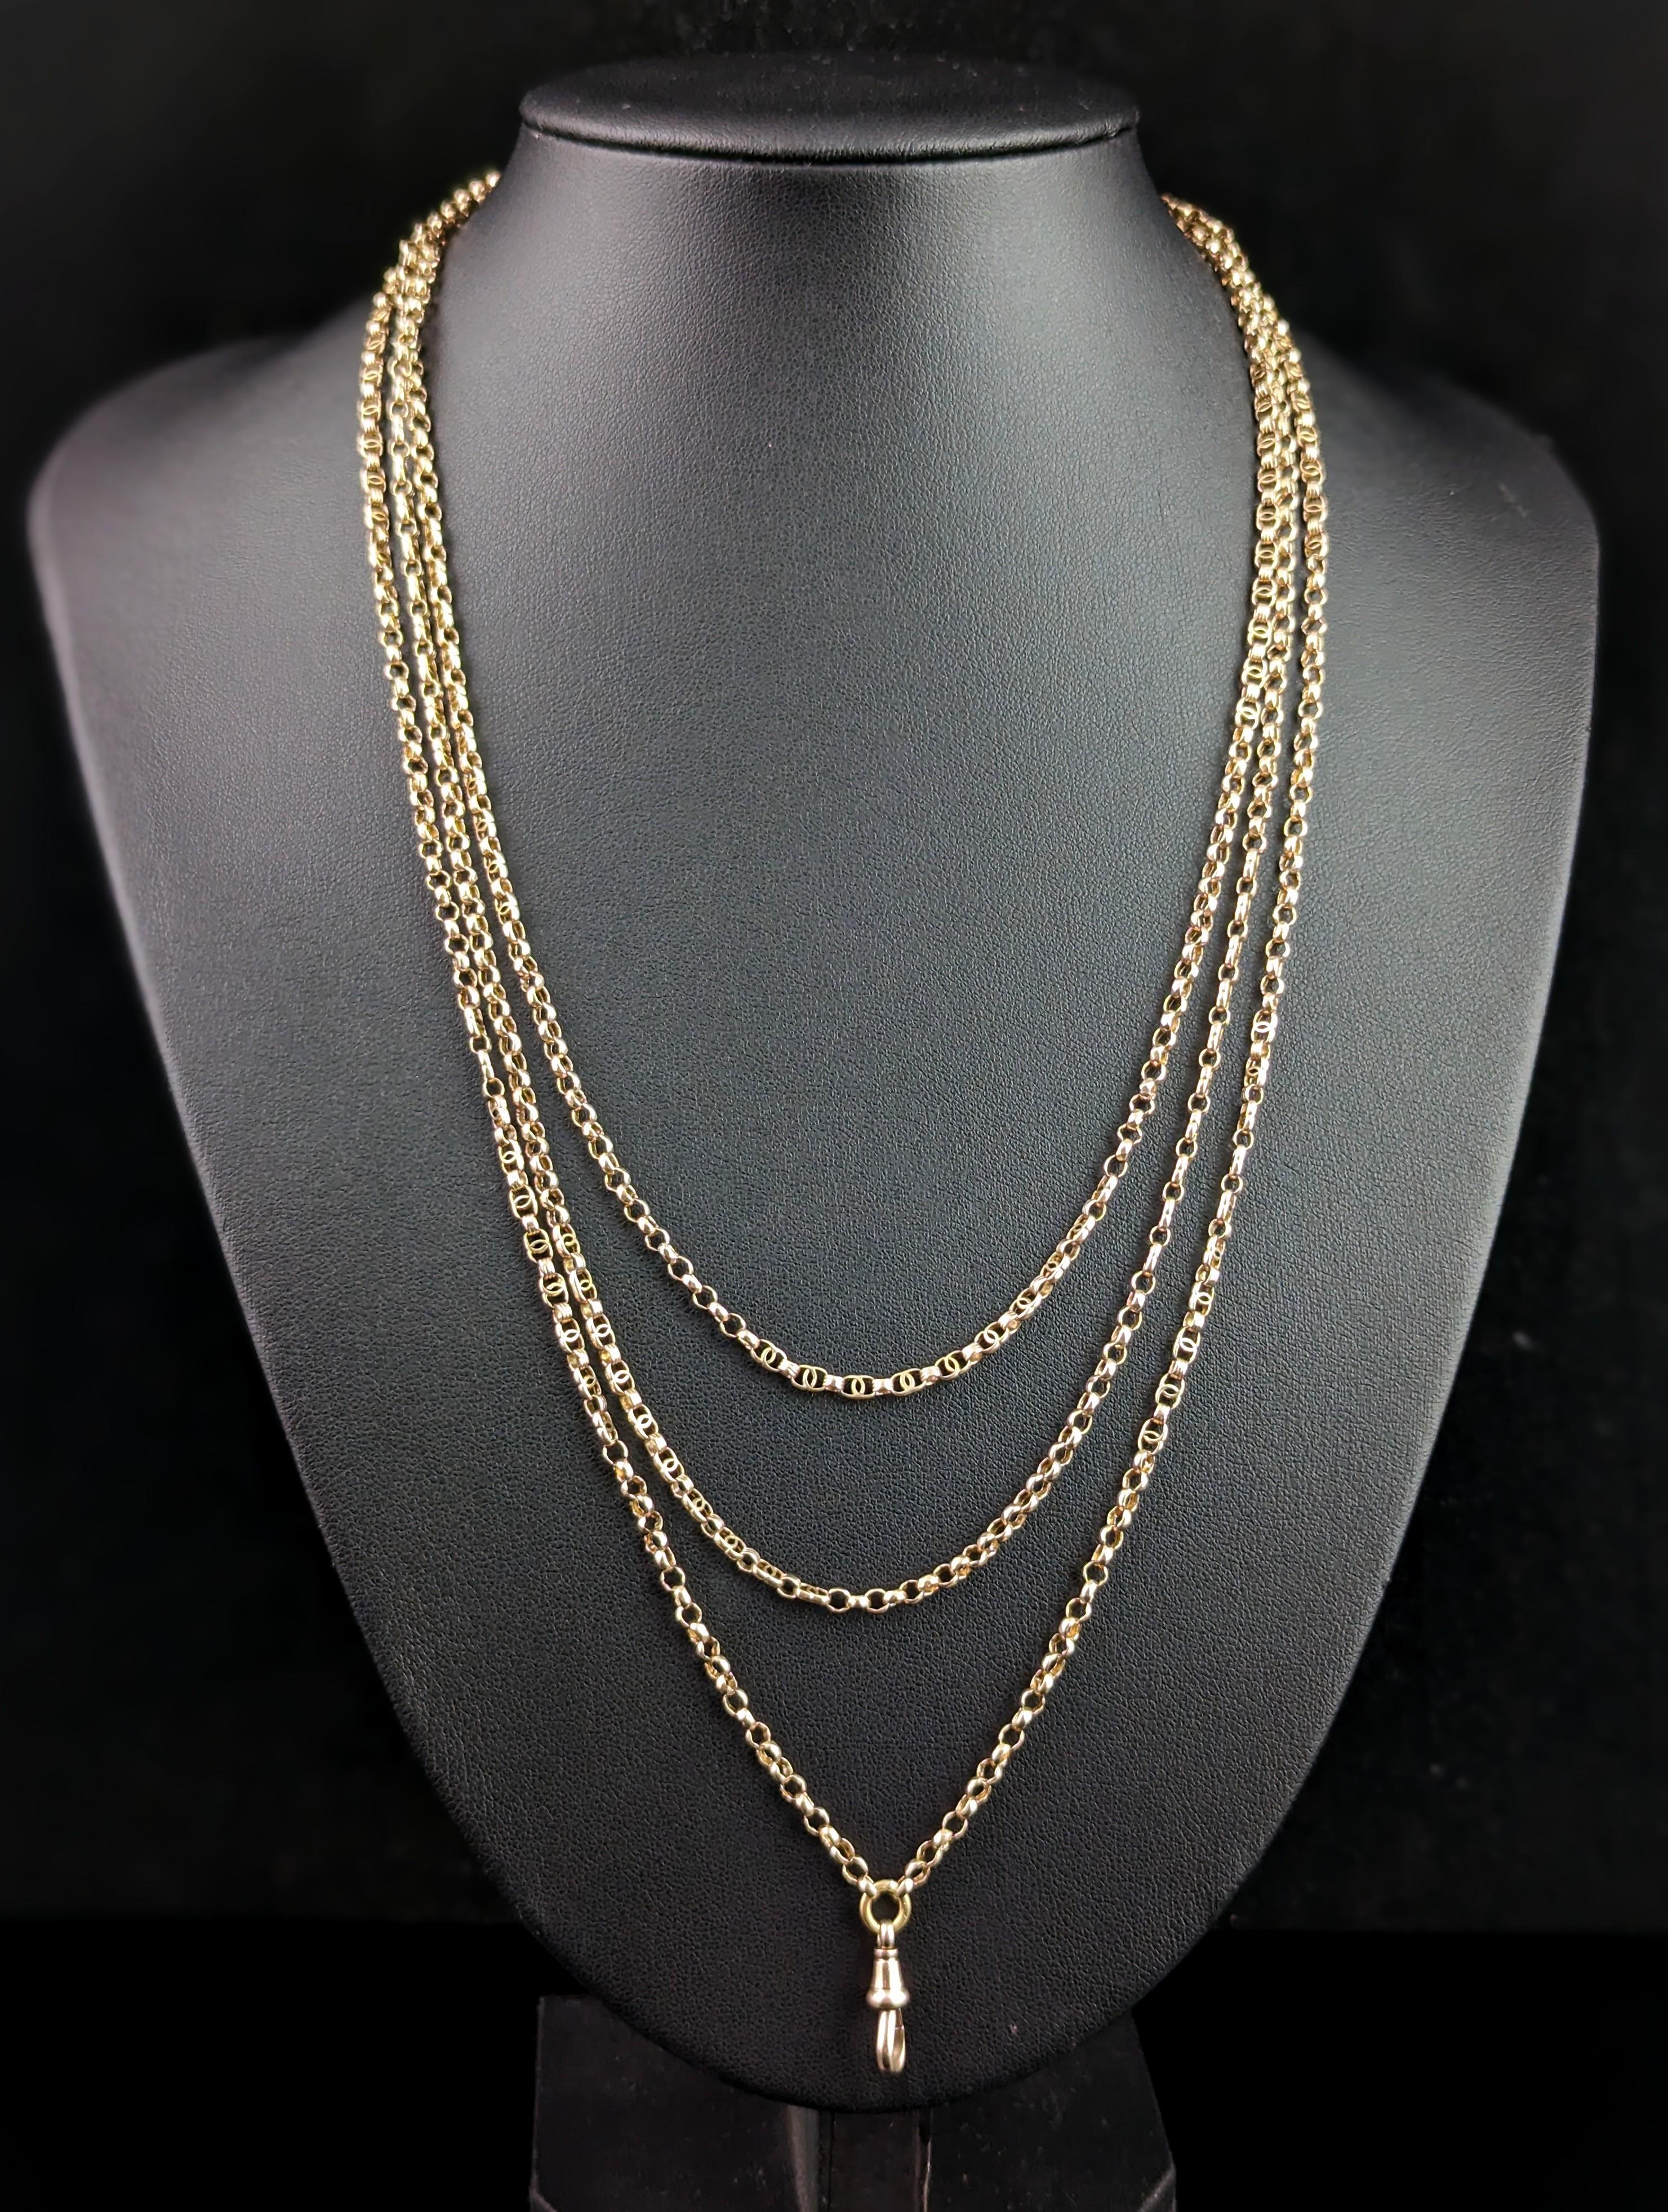 This stunning antique, Victorian 9kt yellow gold longuard chain is sure to turn some heads.

We love a good longuard chain here, such a versatile and wearable piece of jewellery, this one is no exception.

Stunning oval belcher or rolo links in rich